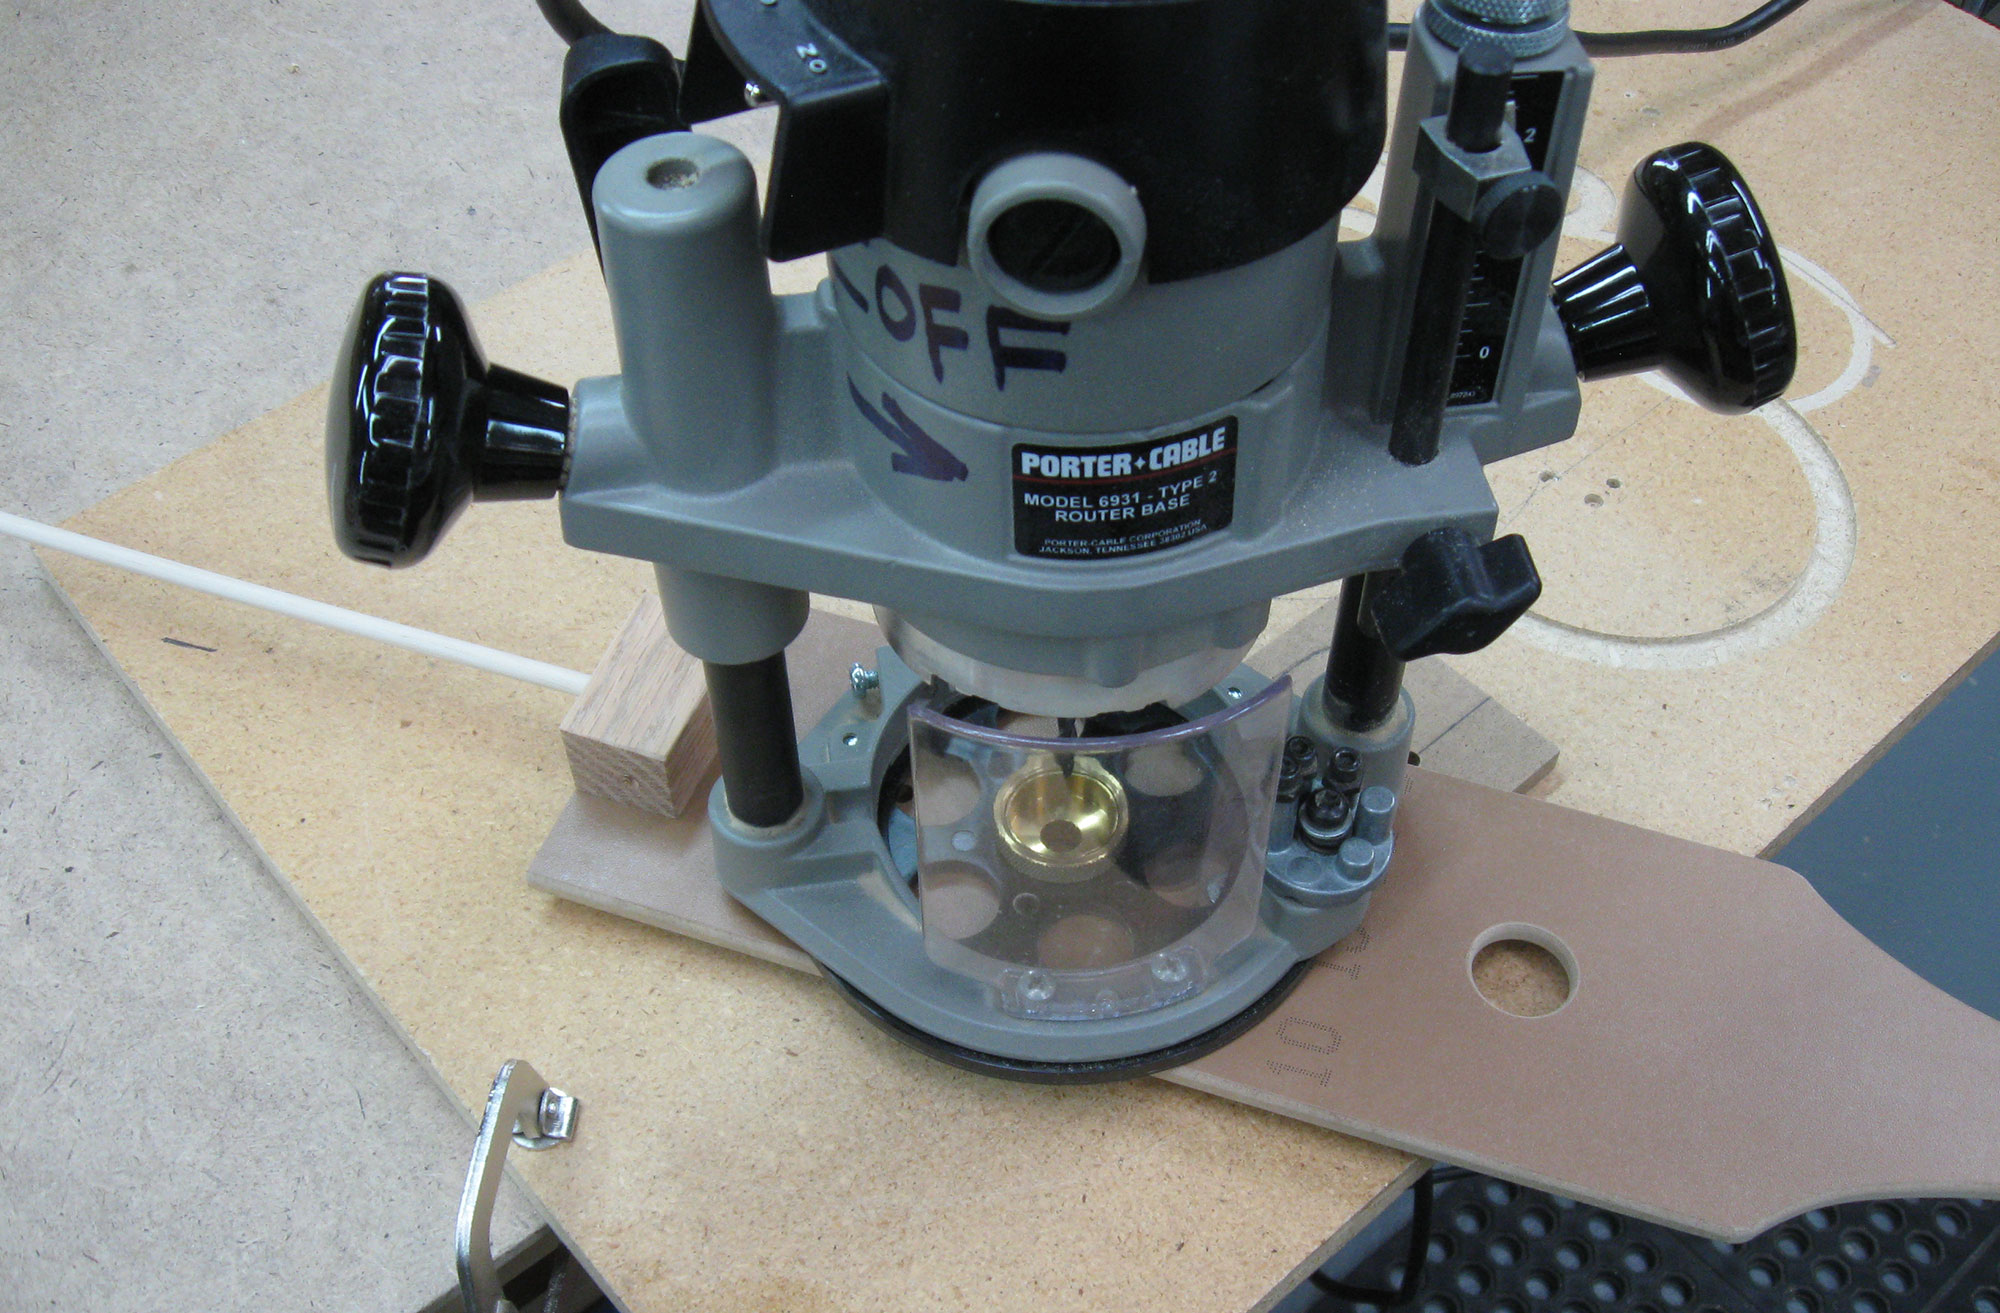 Router placed on jig.